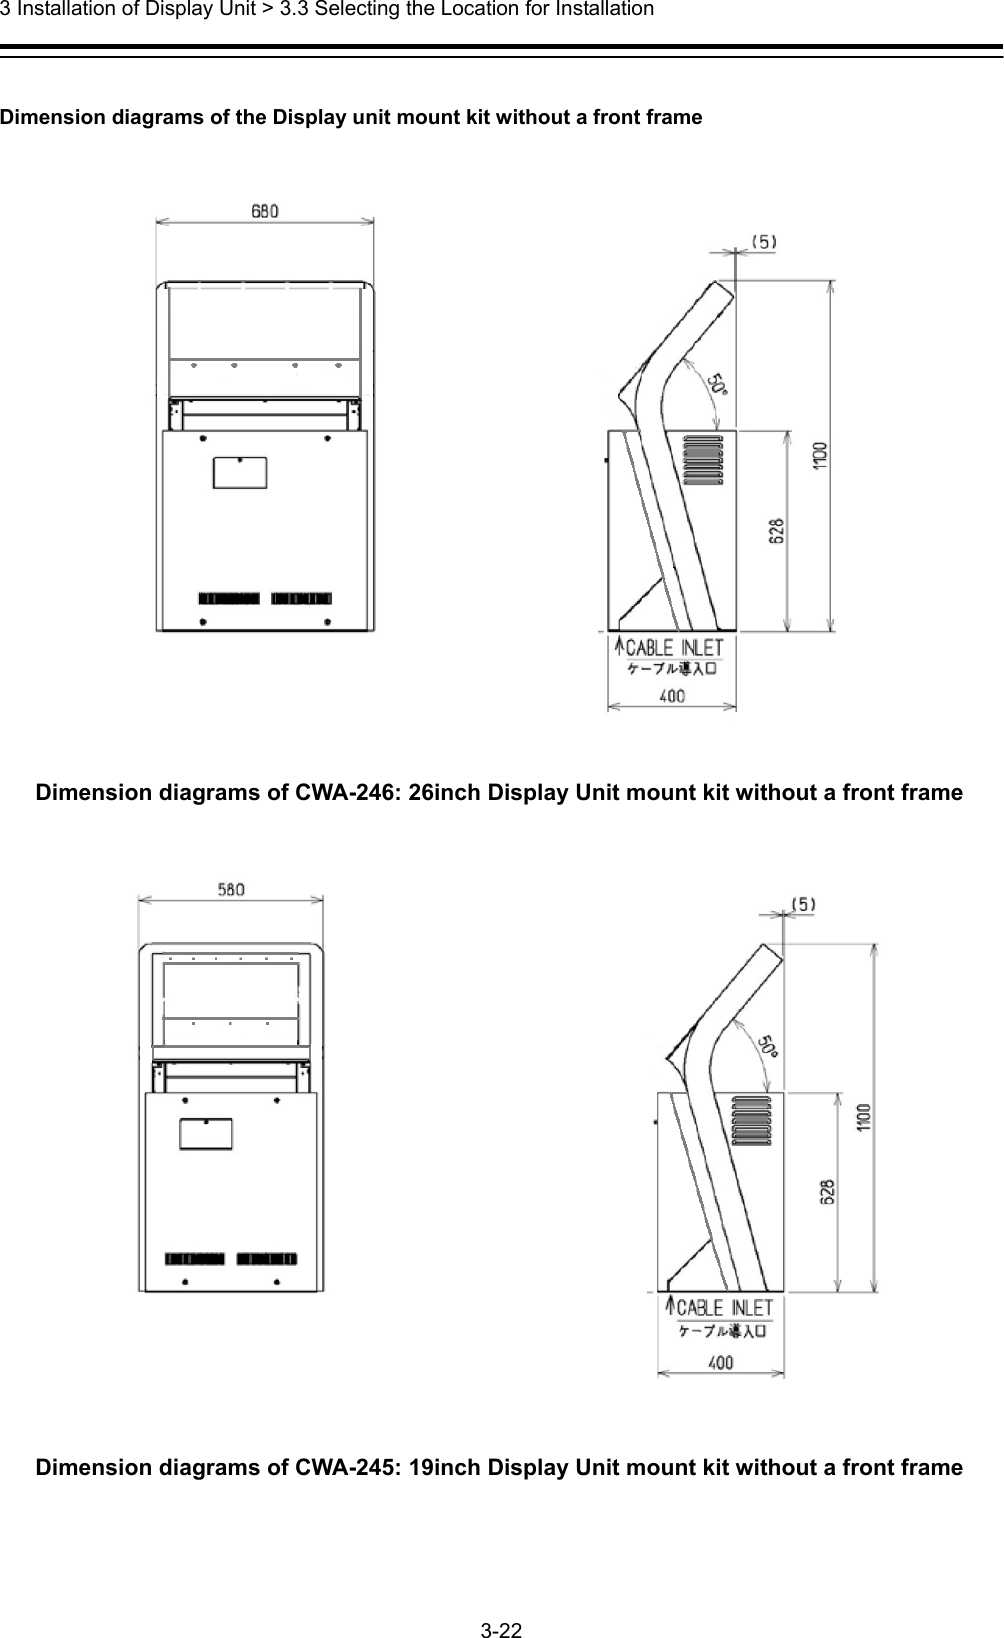  3 Installation of Display Unit &gt; 3.3 Selecting the Location for Installation 3-22   Dimension diagrams of the Display unit mount kit without a front frame   Dimension diagrams of CWA-246: 26inch Display Unit mount kit without a front frame   Dimension diagrams of CWA-245: 19inch Display Unit mount kit without a front frame 